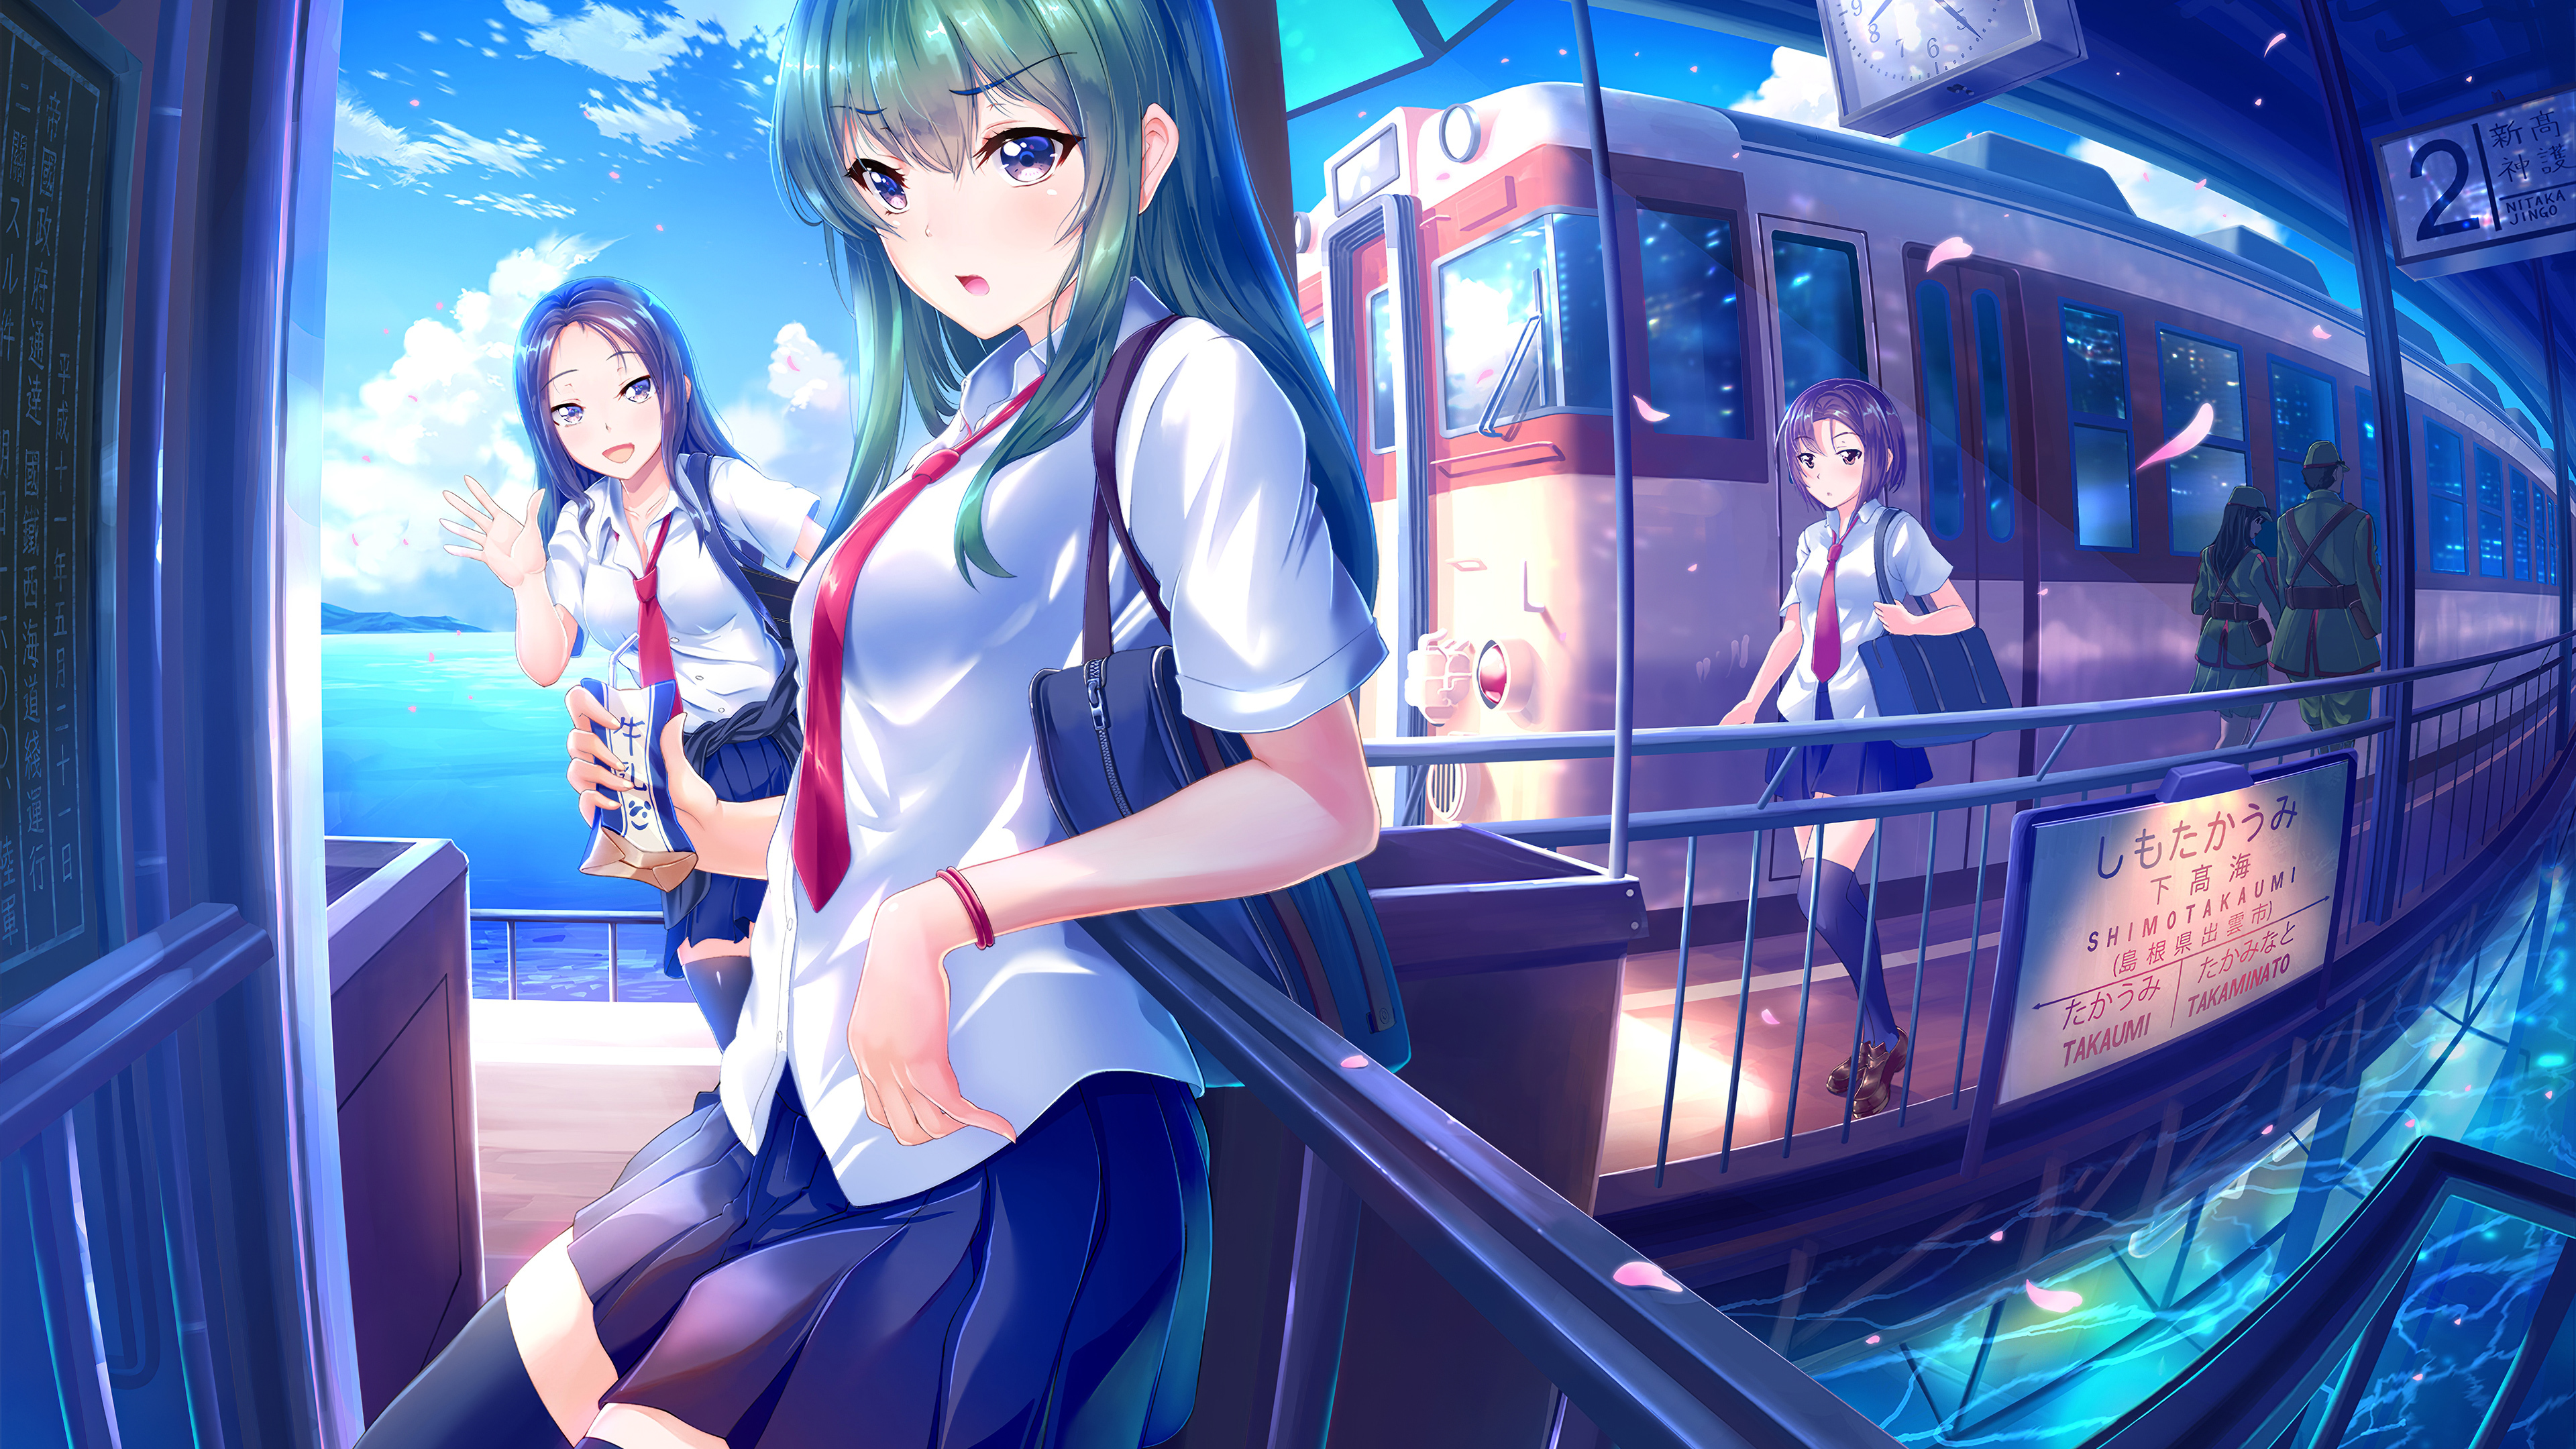 3840x2160 Subway Girls Anime 4k 4k Hd 4k Wallpapers Images Backgrounds Photos And Pictures